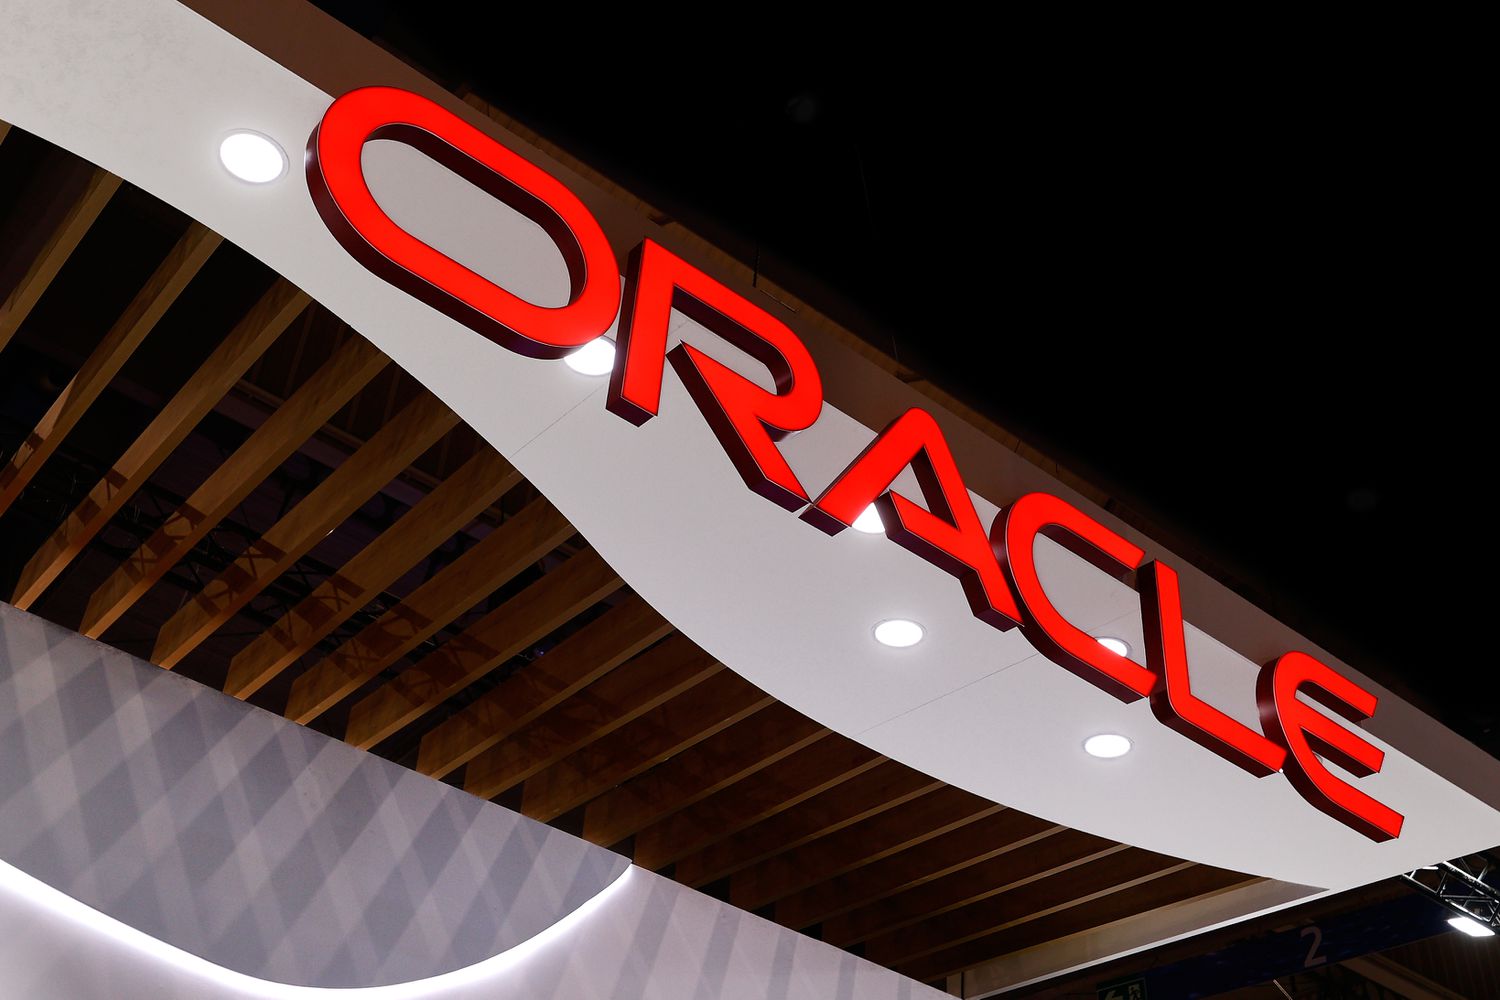 What You Need To Know Ahead of Oracle